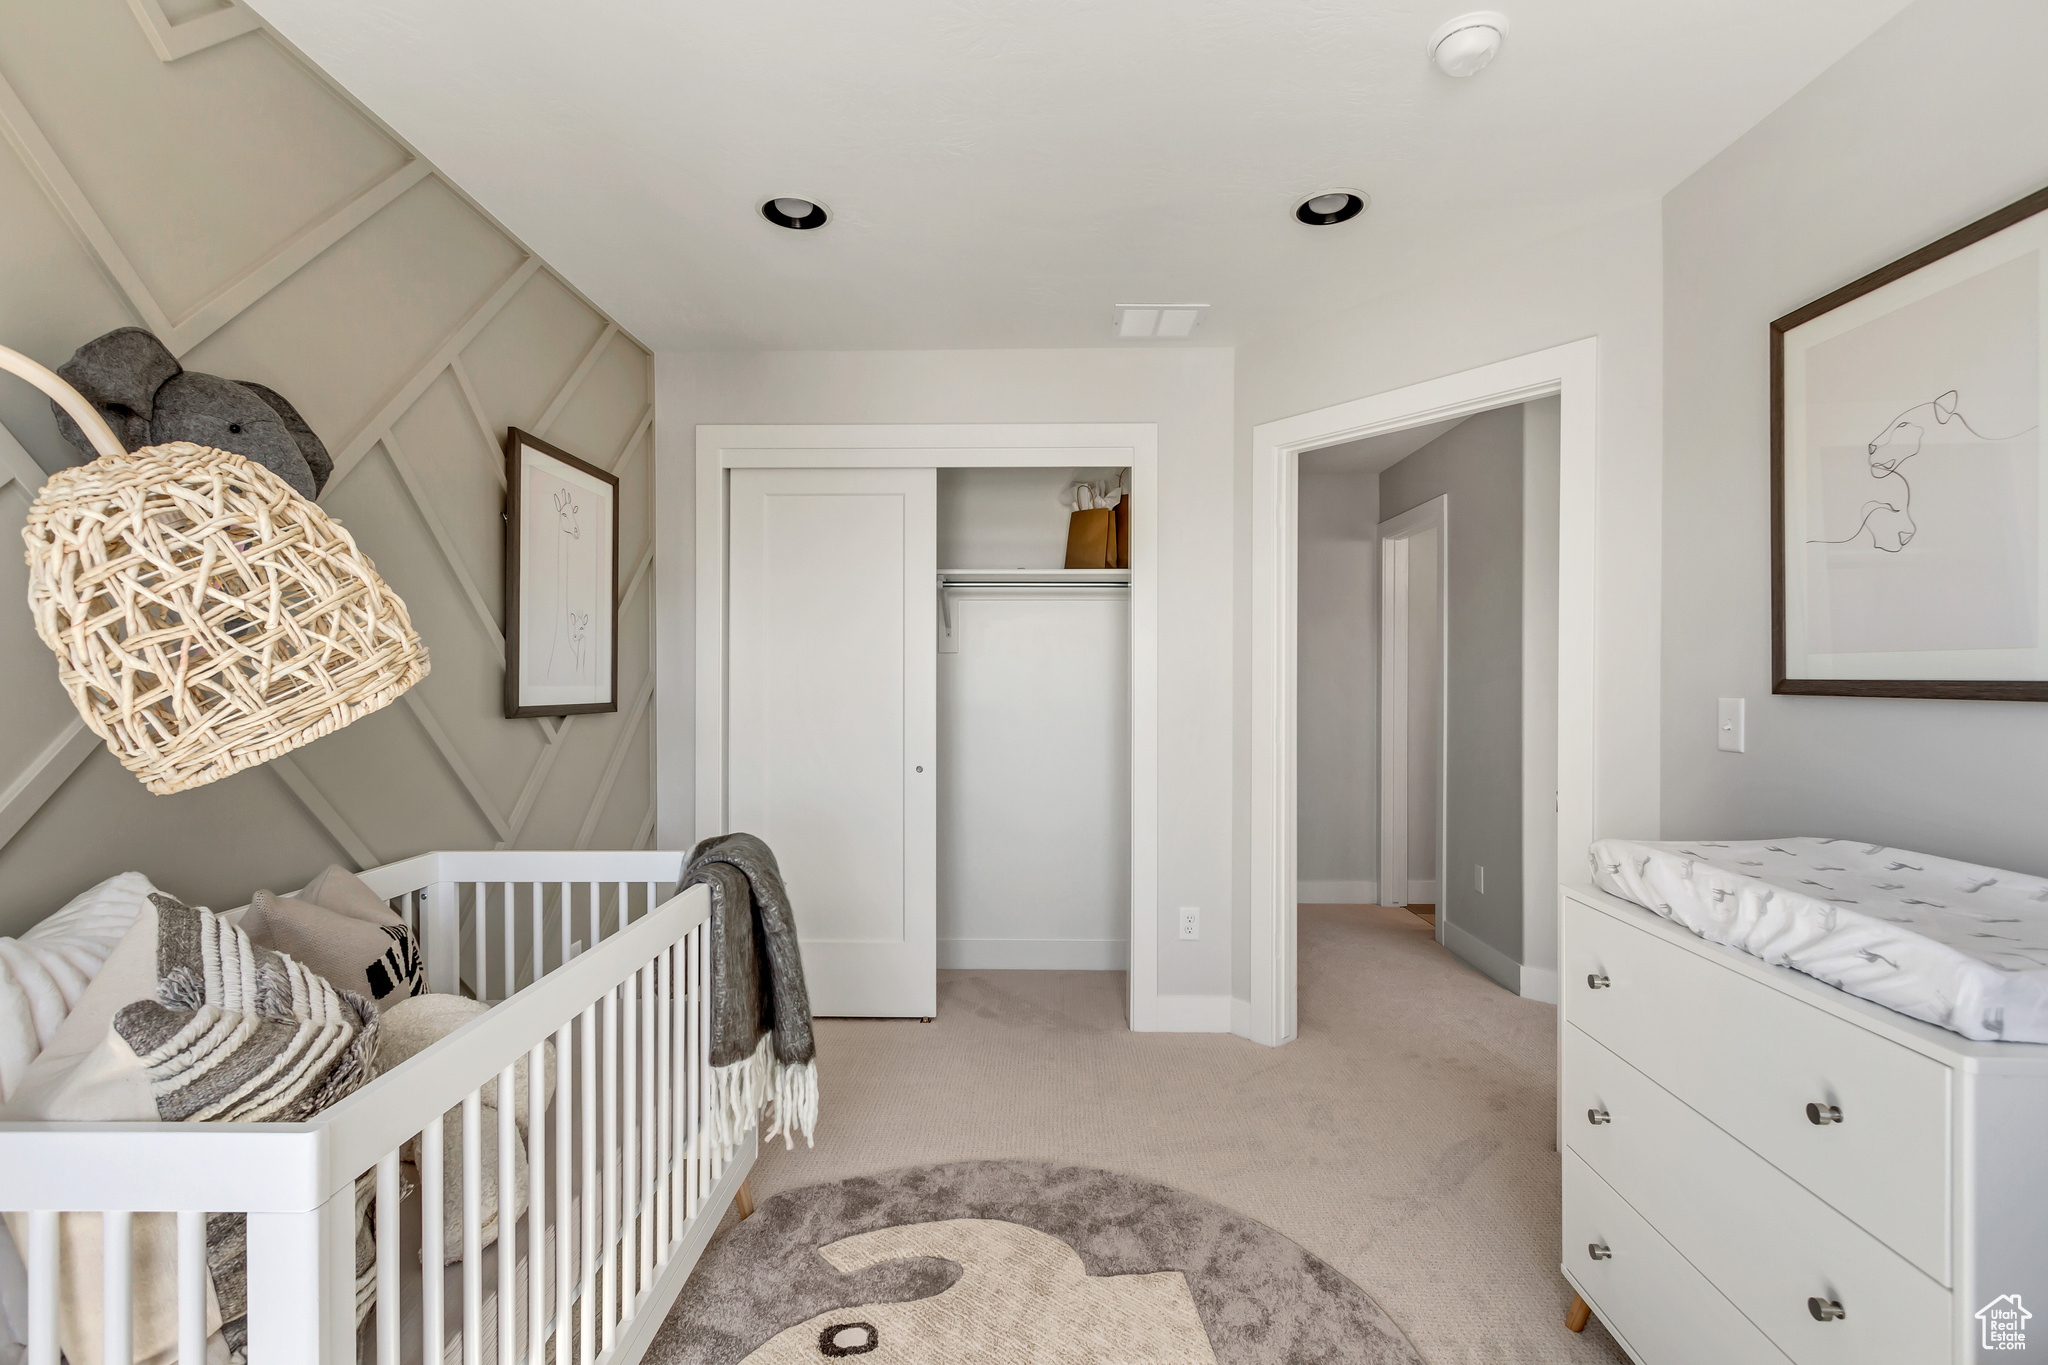 Bedroom featuring light colored carpet, a closet, and a crib